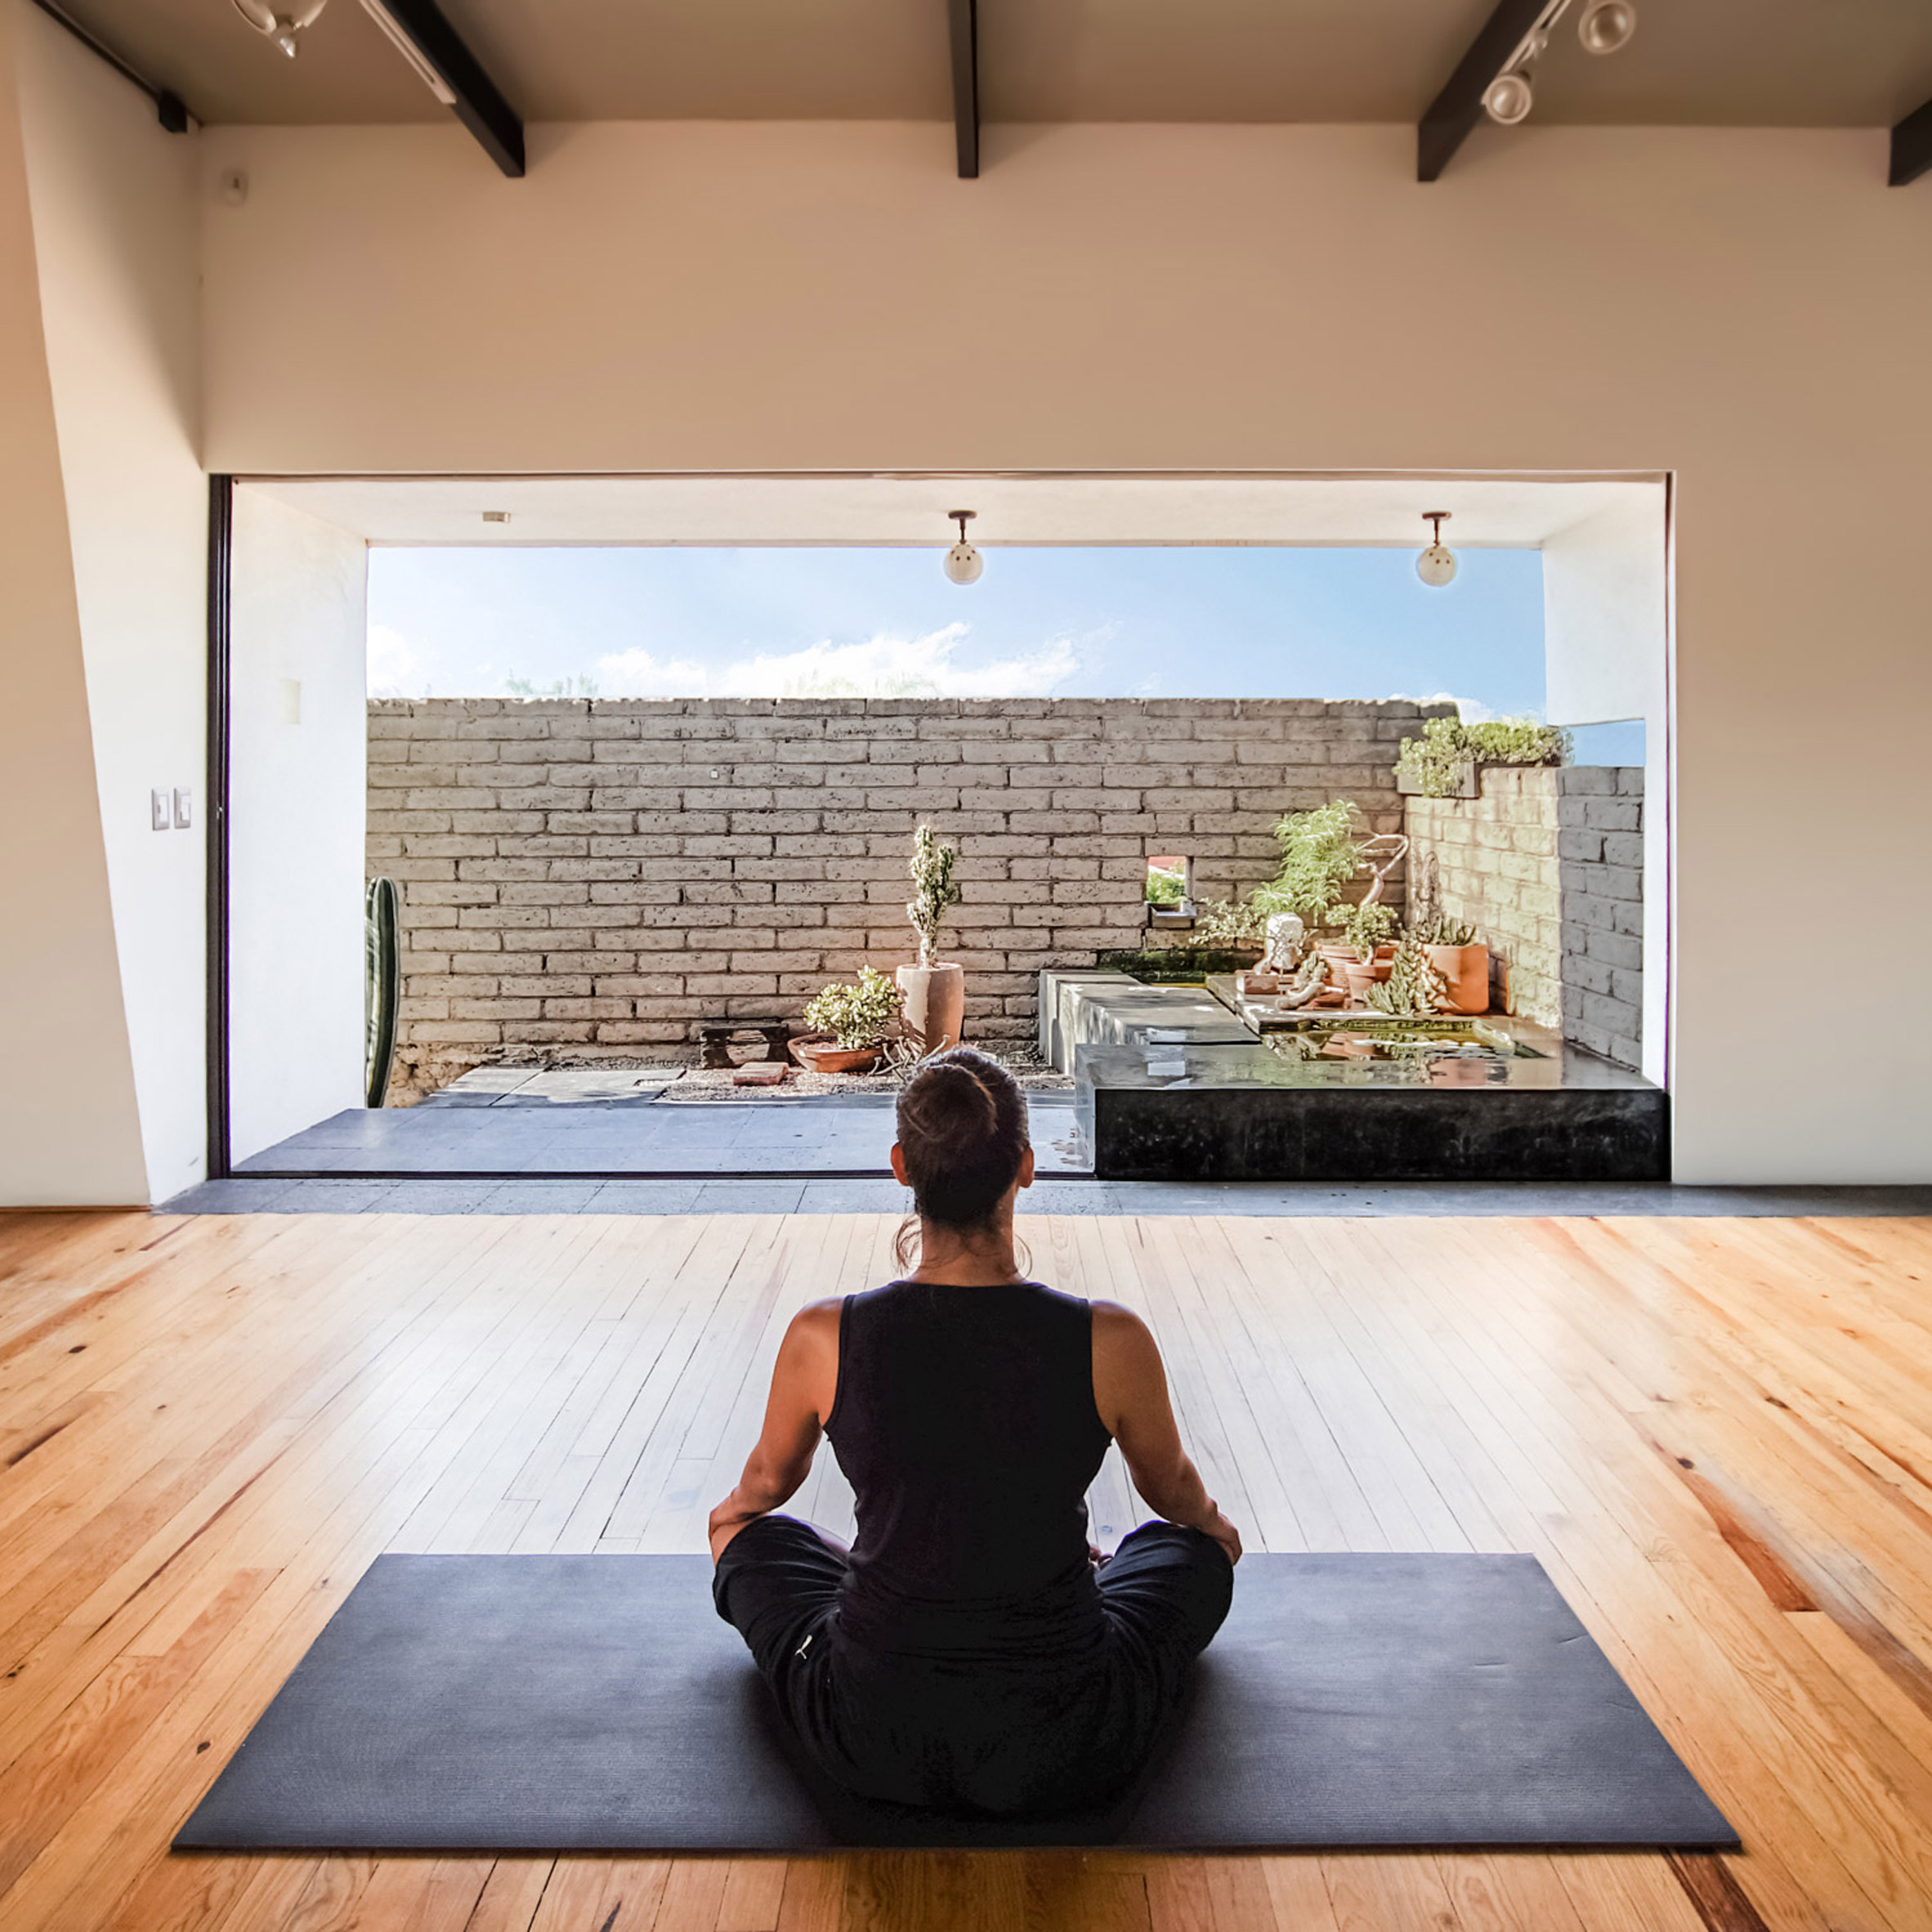 10 homes designed for practising yoga and meditation